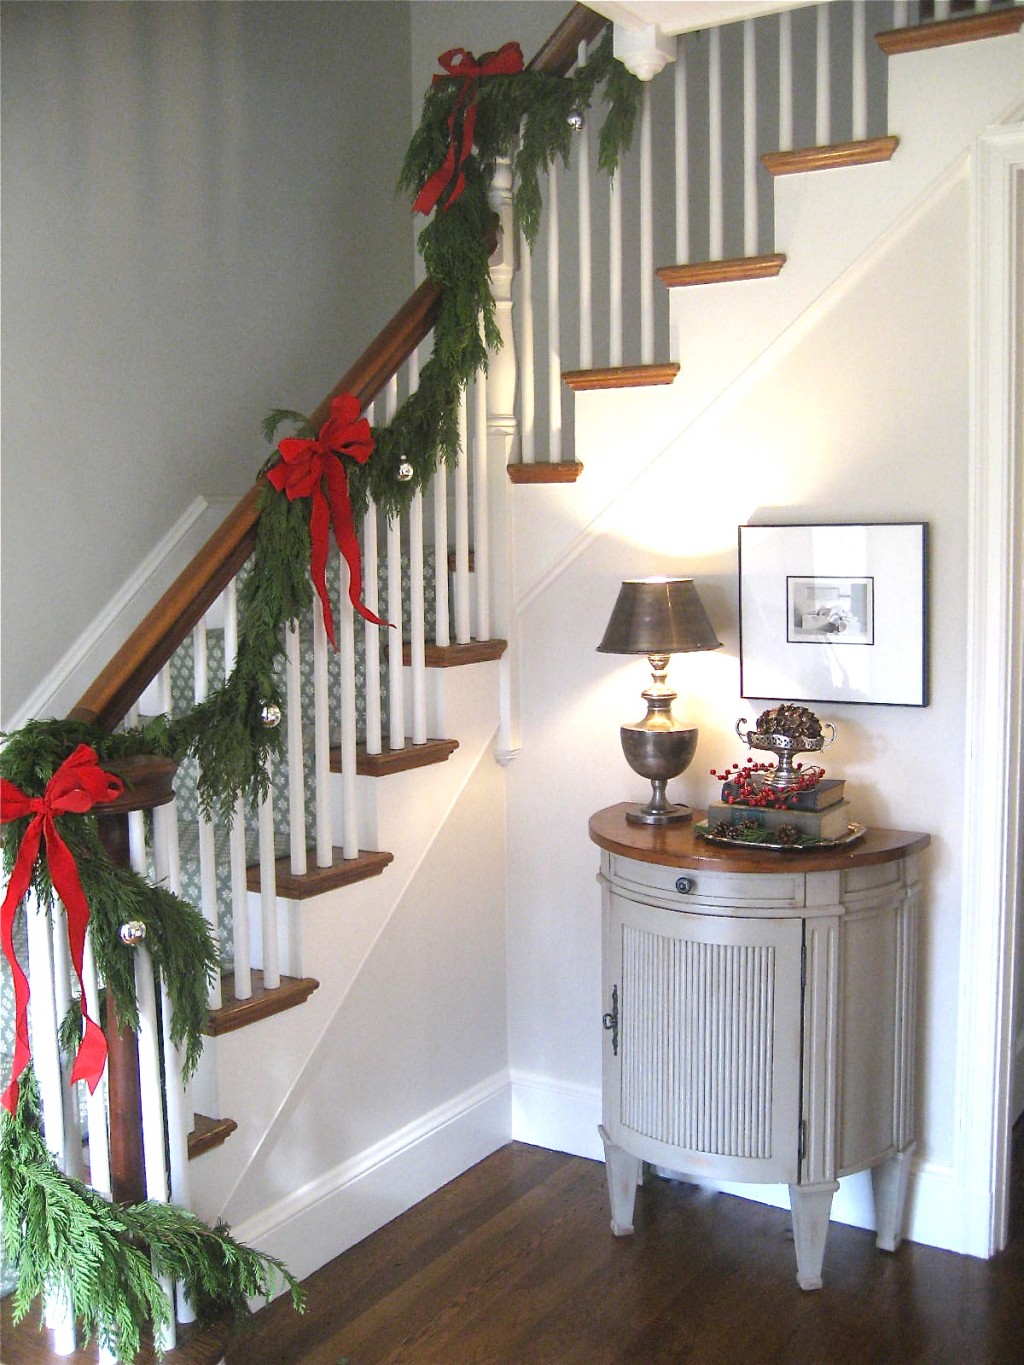 Decorating Stairs For Christmas in Interior Design